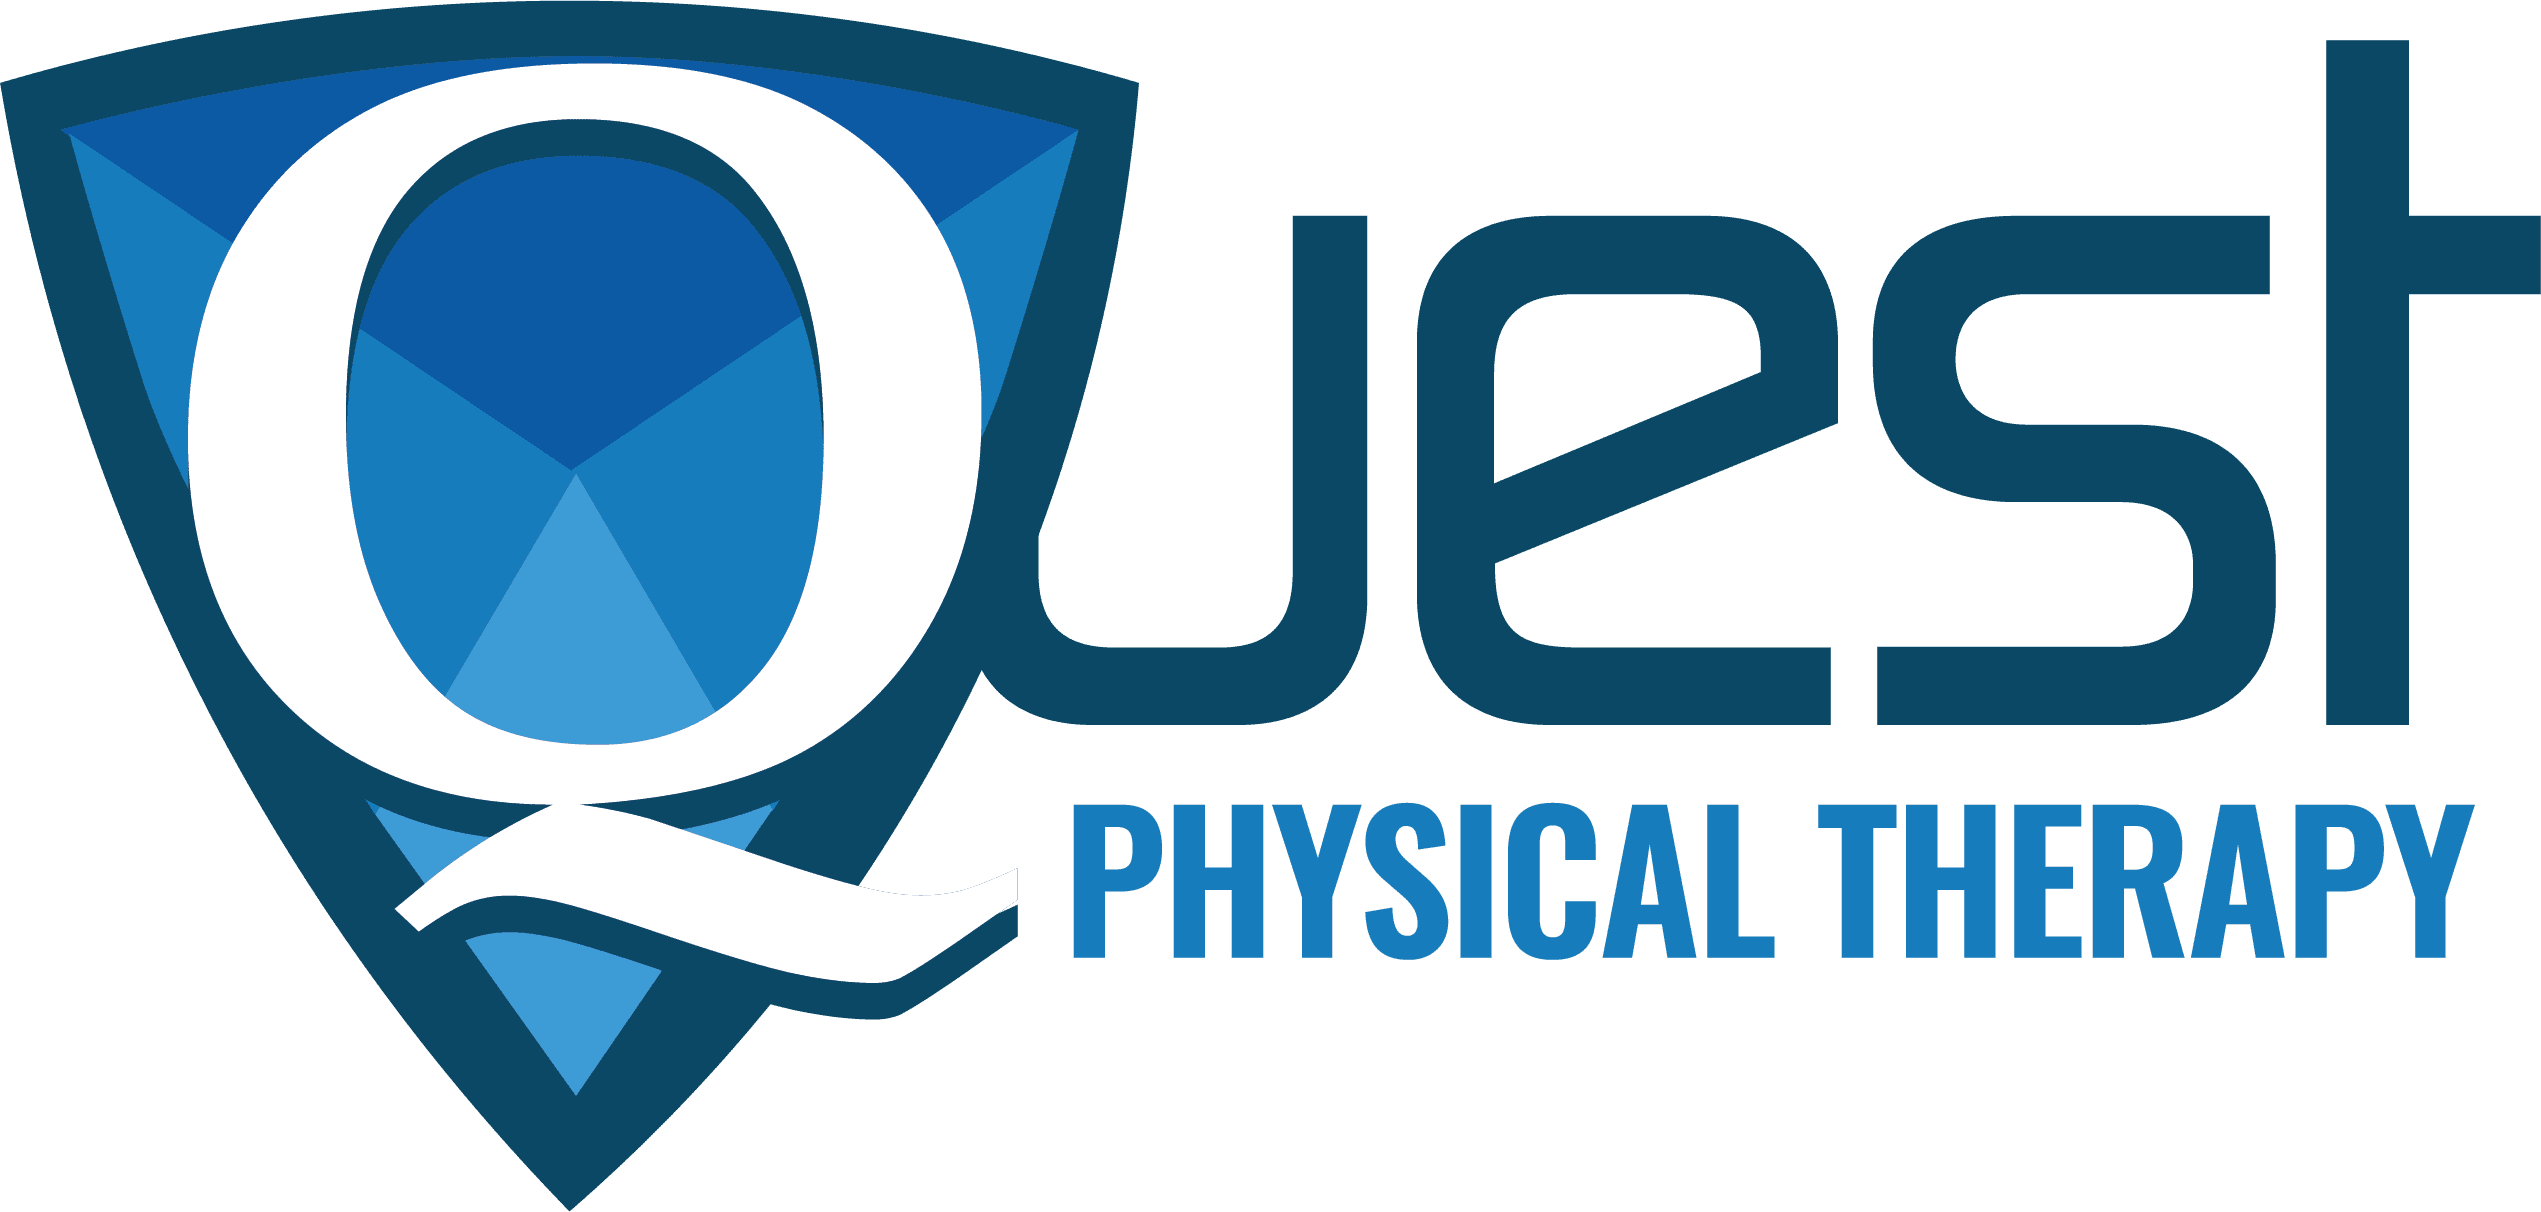 Quest Physical Therapy | Evans, GA